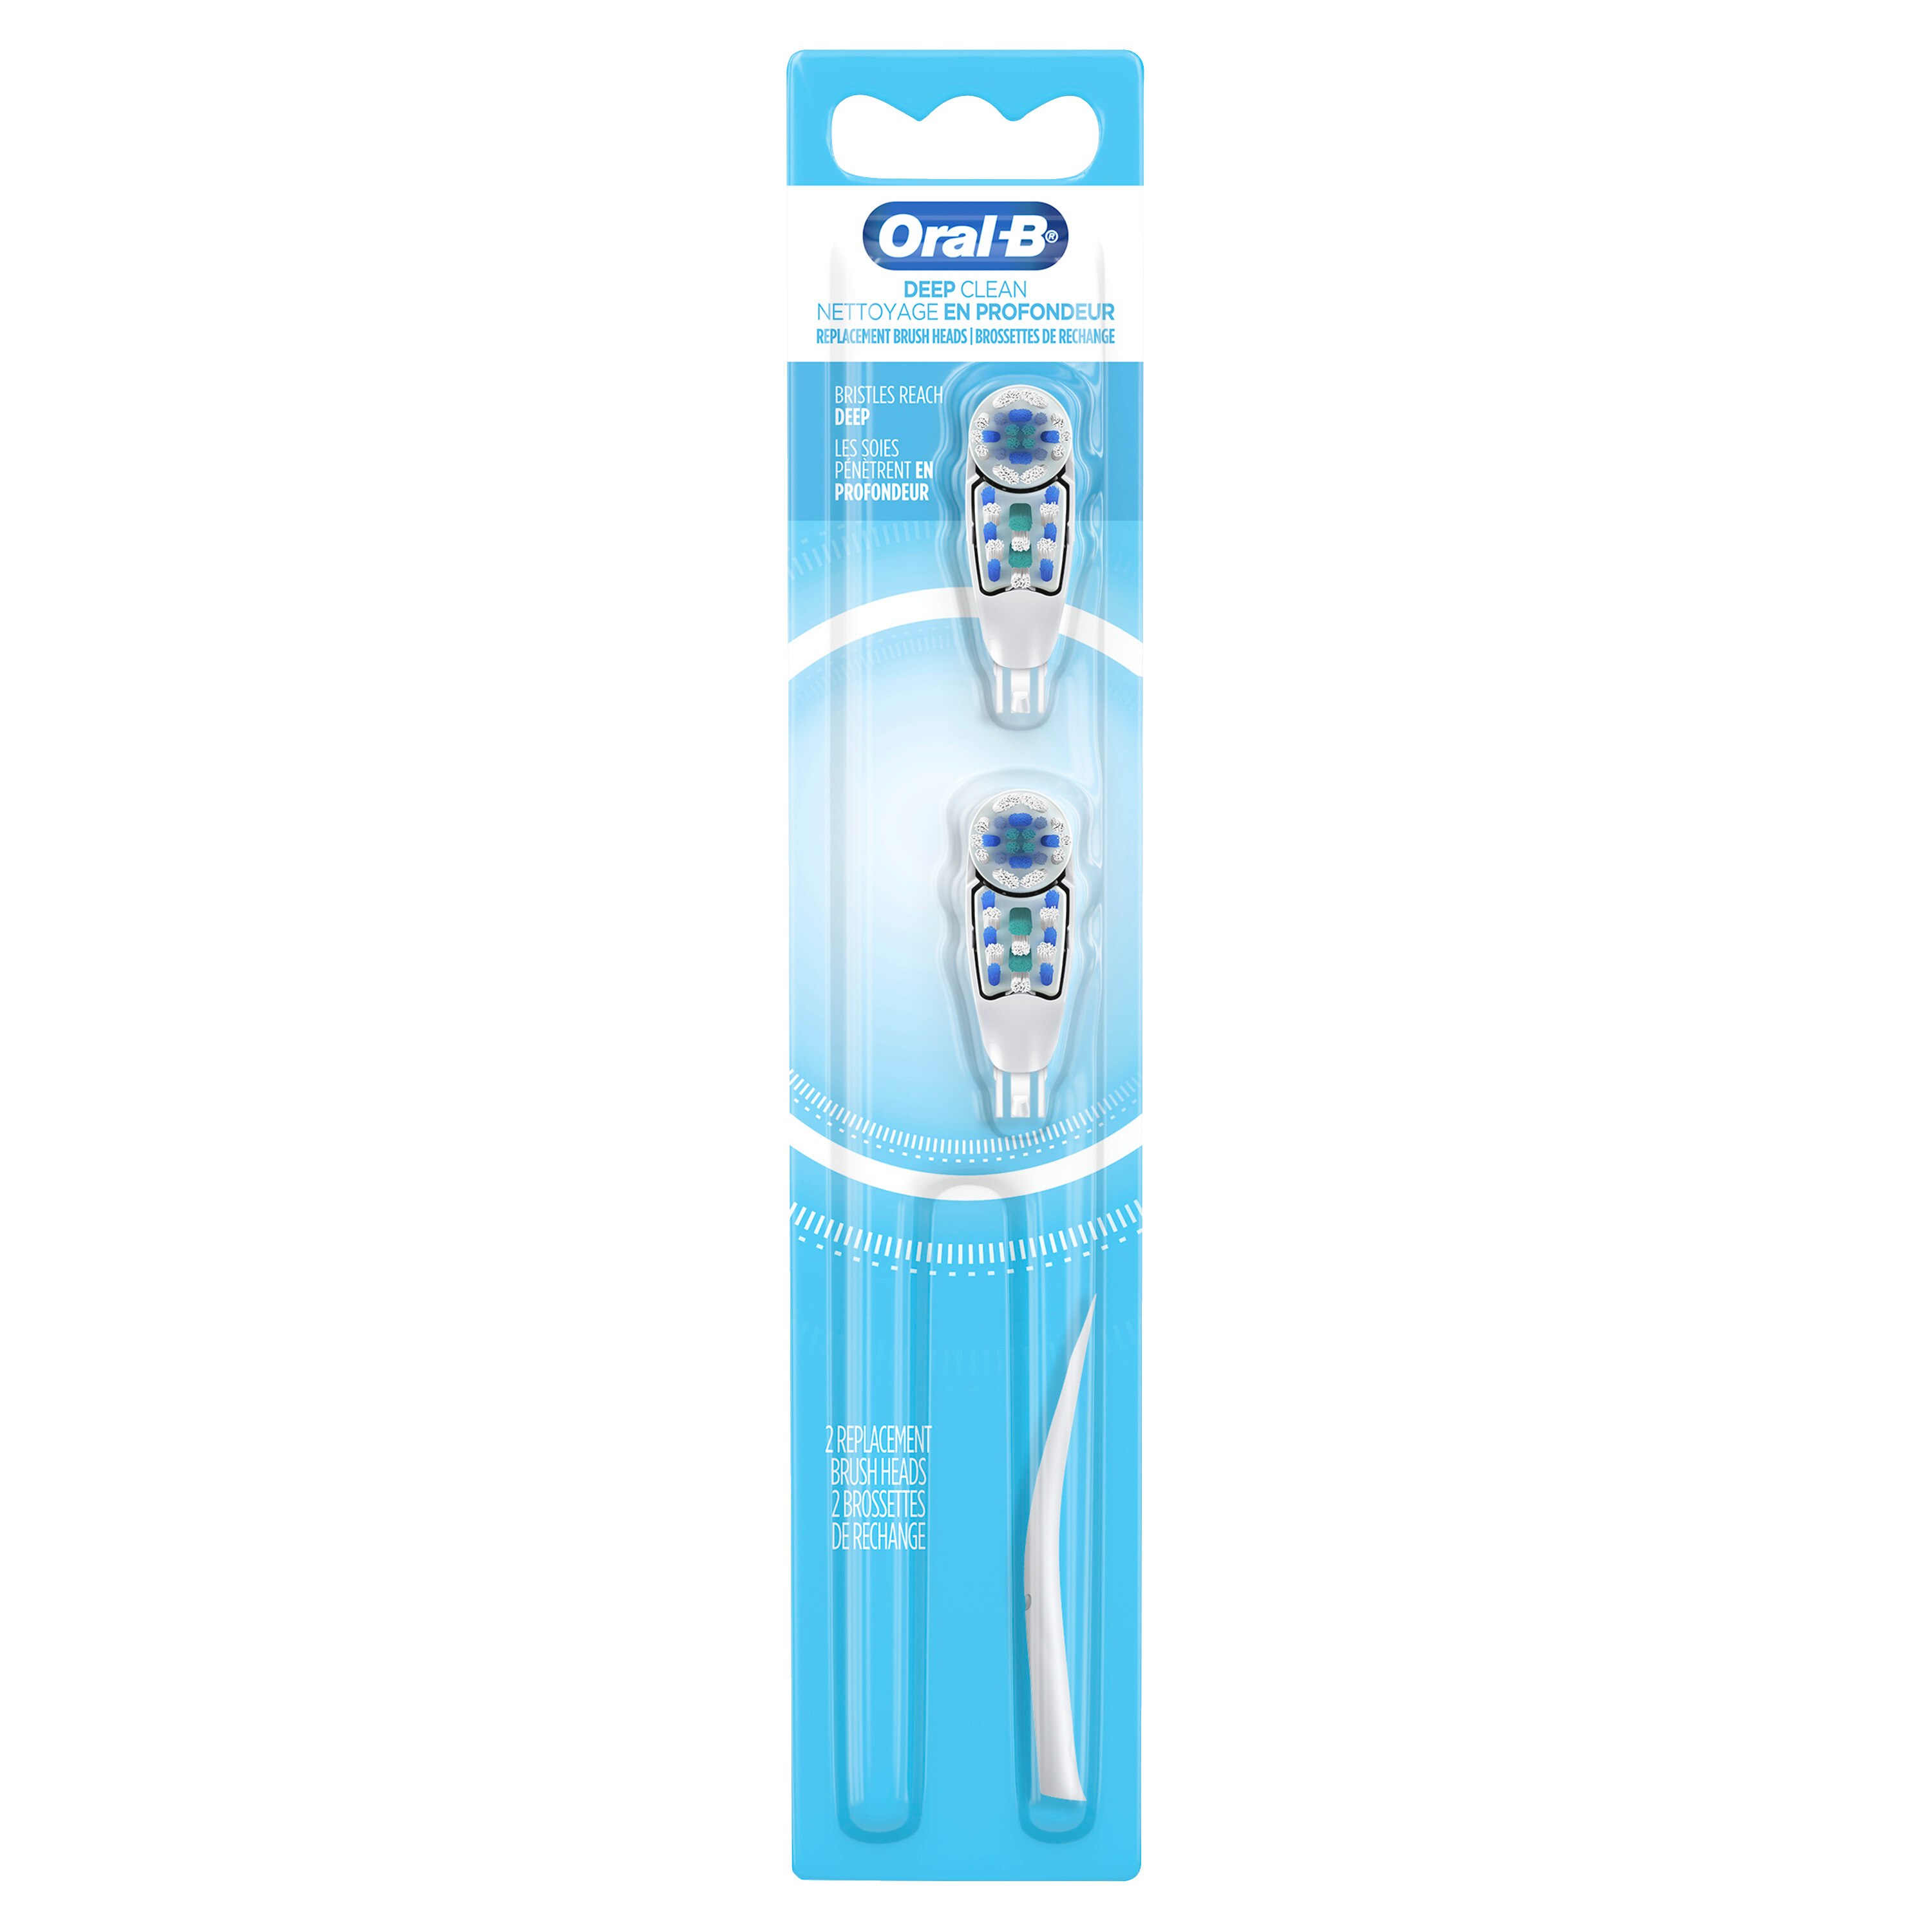 Oral-B Deep Clean Battery Powered Toothbrush Replacement Brush Heads, 2 pack